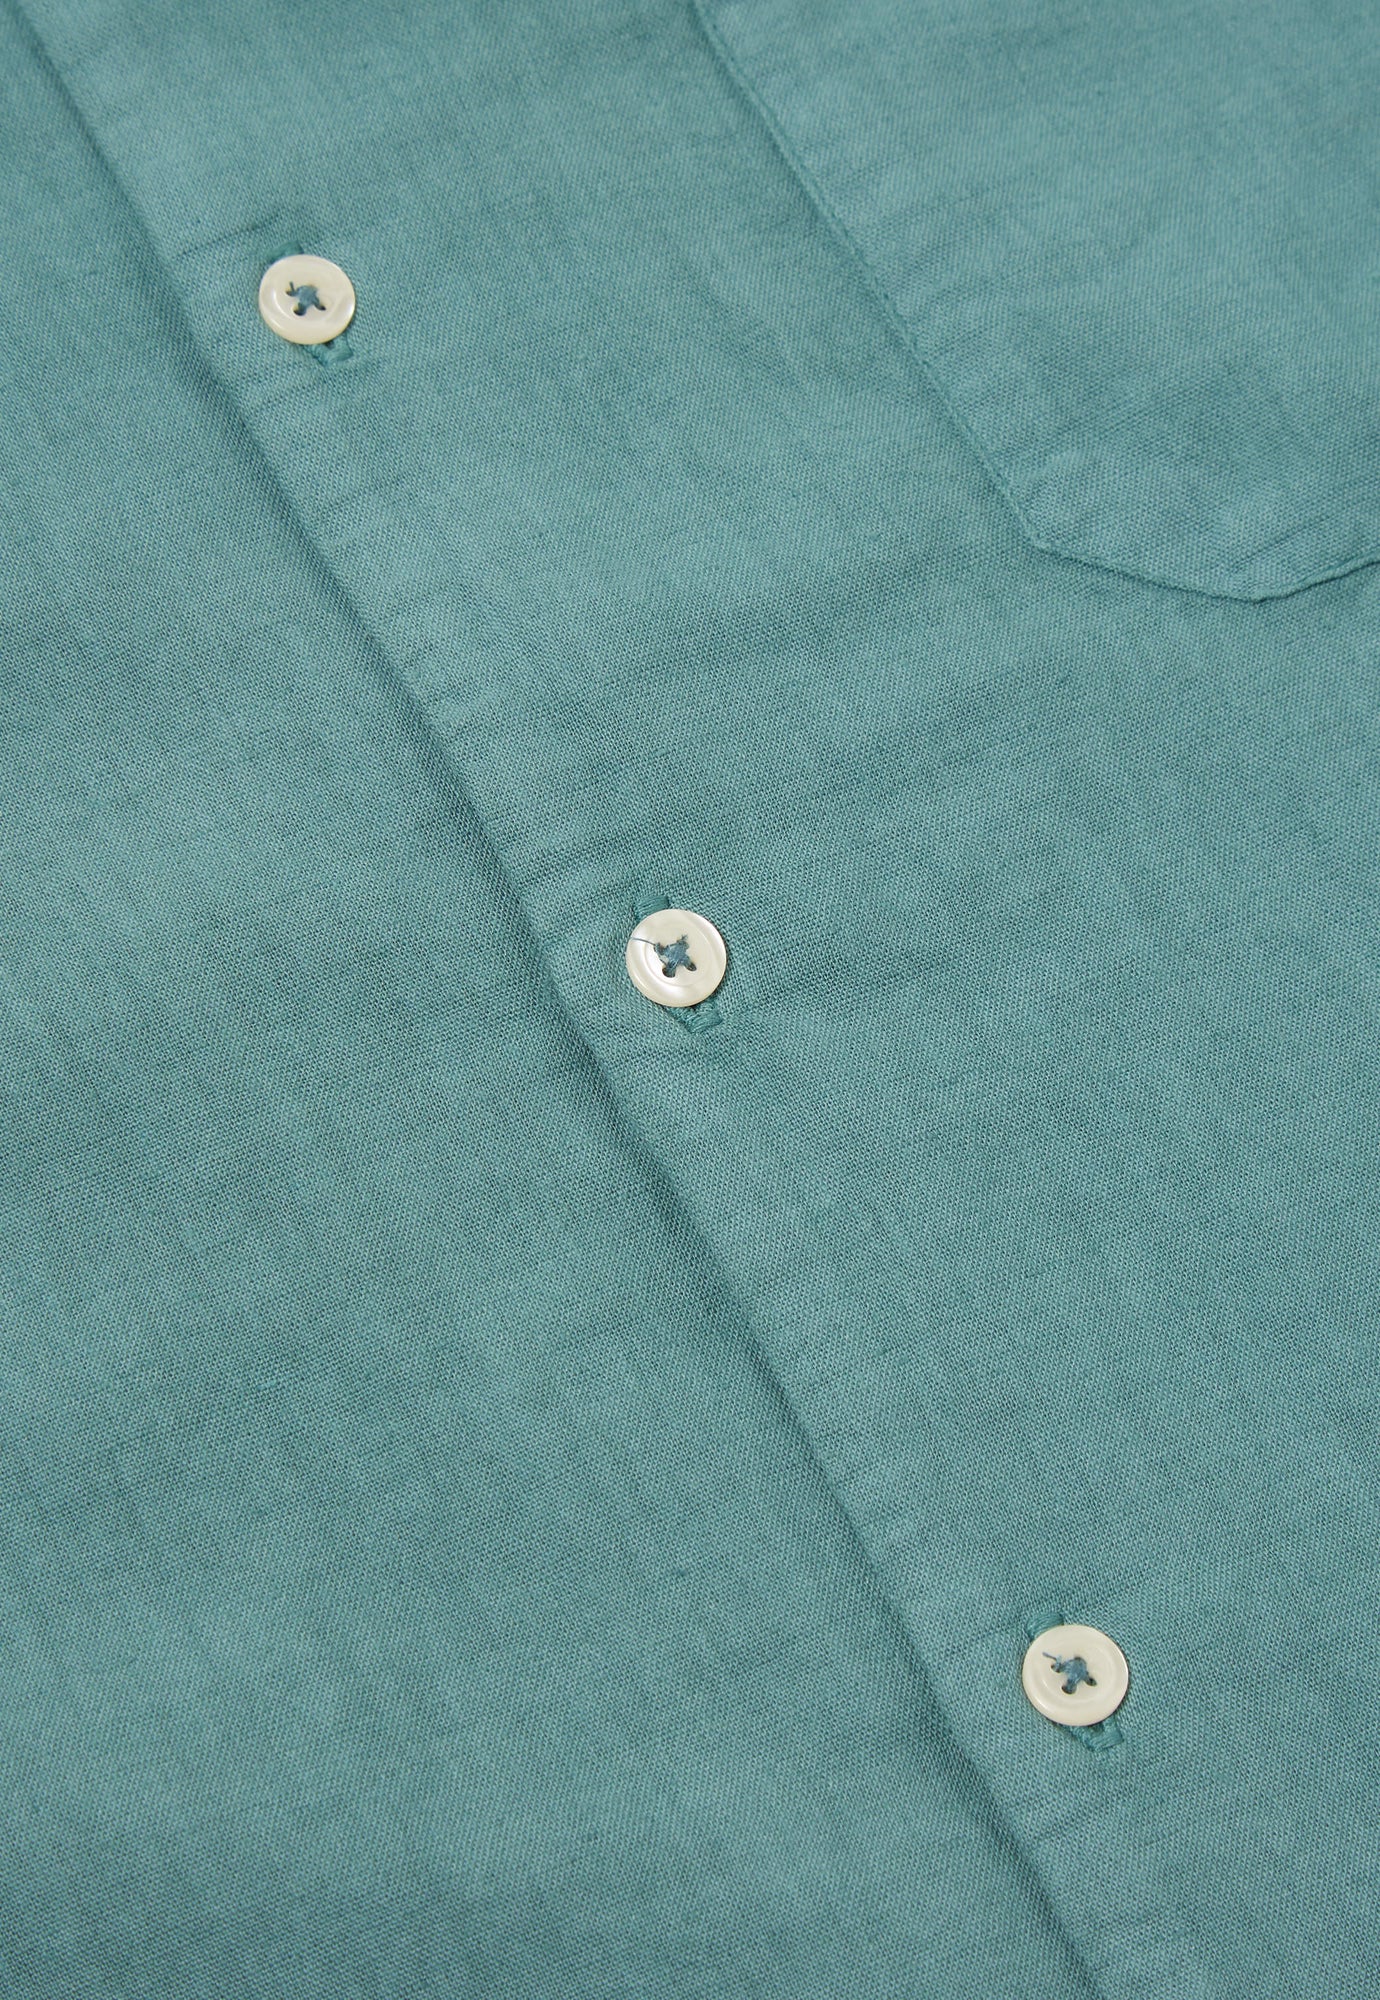 Universal Works Road Shirt in Sea Blue Linen Cotton Shirting